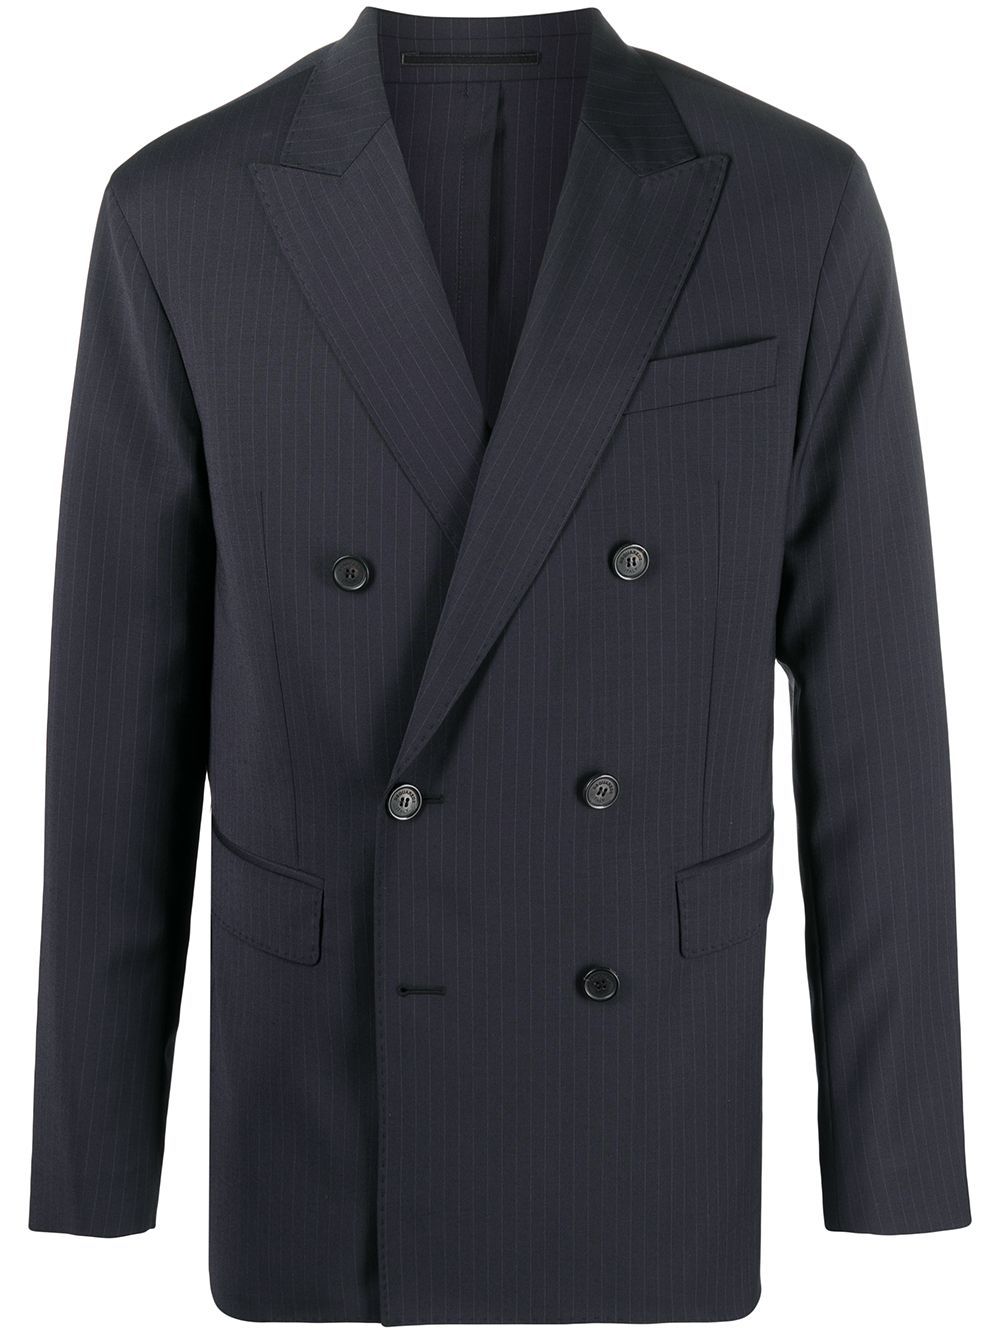 DSQUARED2 Pinstripe Double Breasted Jacket, $842 | farfetch.com | Lookastic